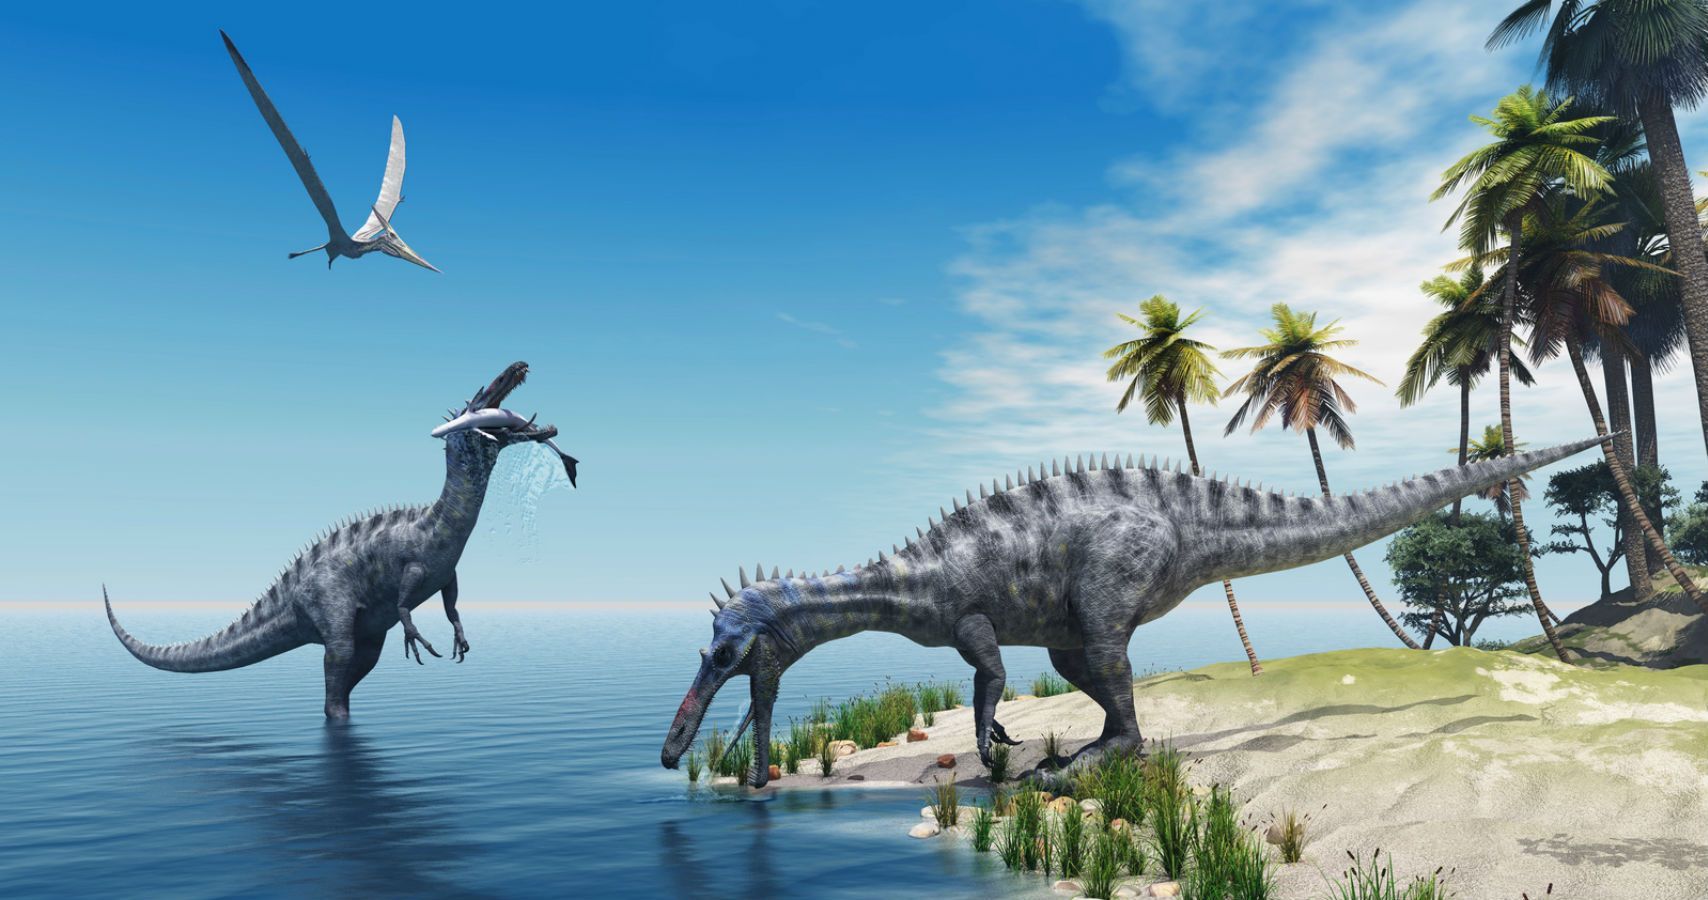 Dinosaurs on the island and on land